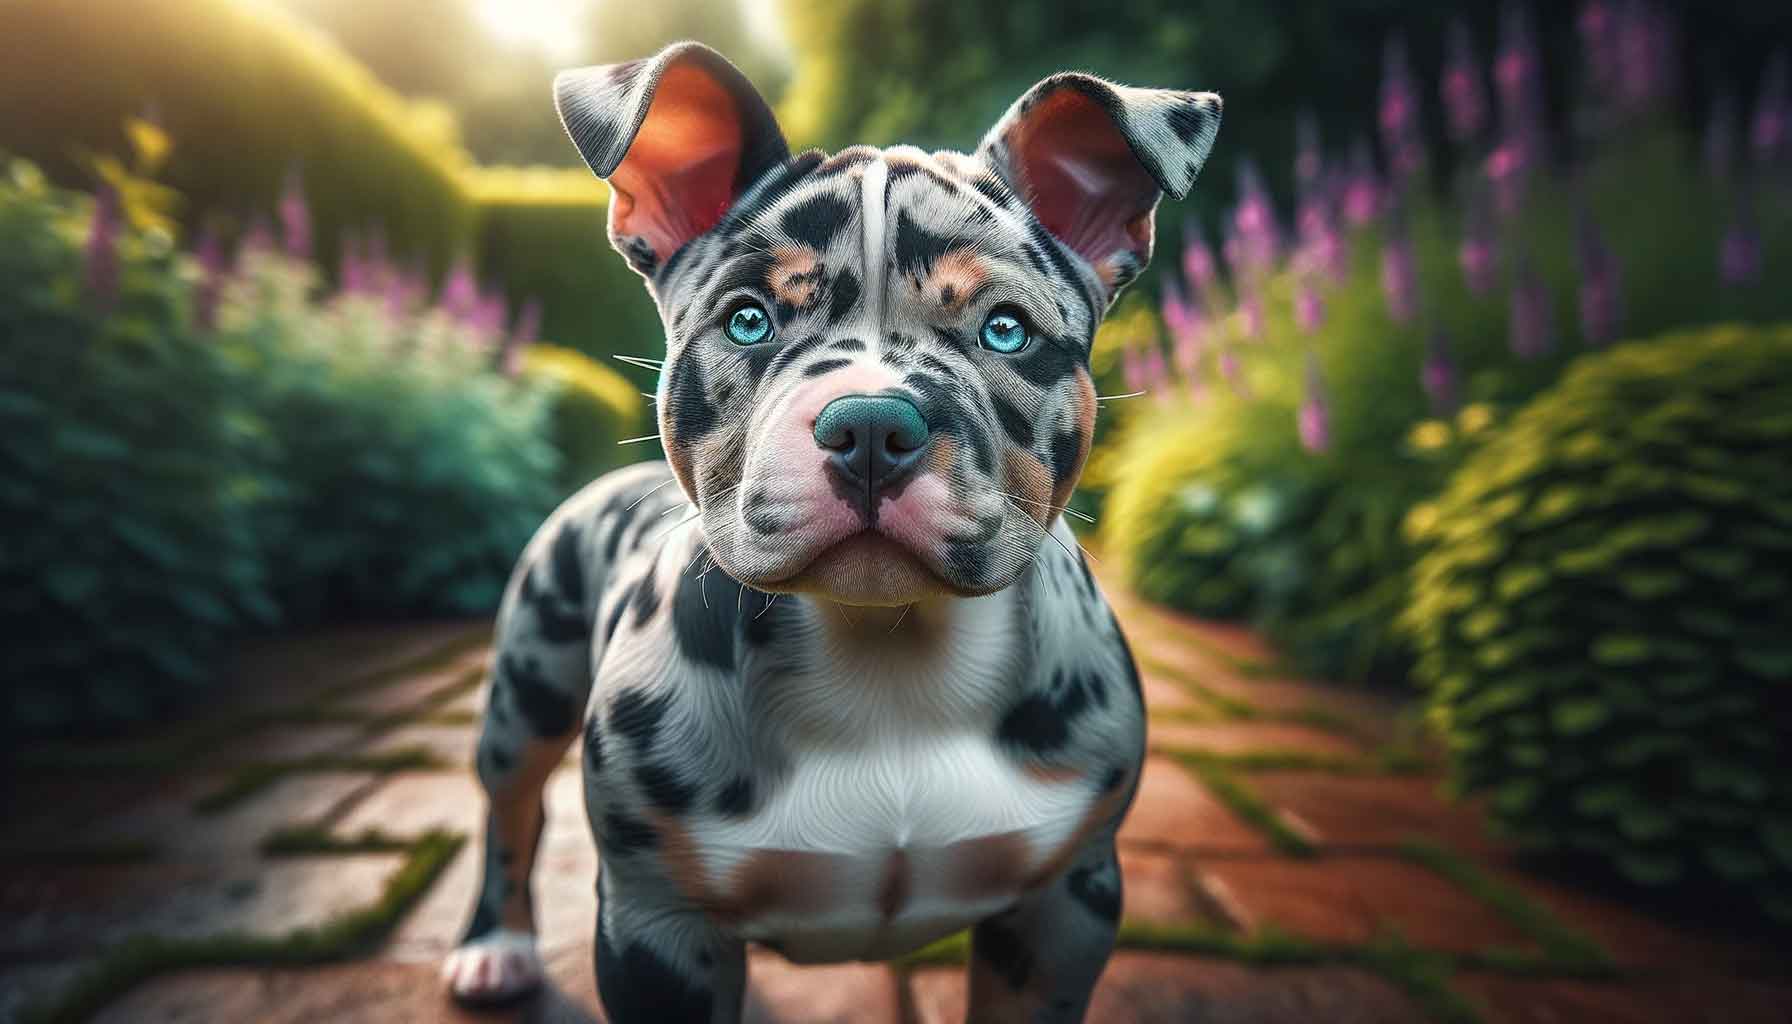 Merle Micro Bully with patches of varying colors in its coat, standing outdoors in a green garden with one bright blue eye.